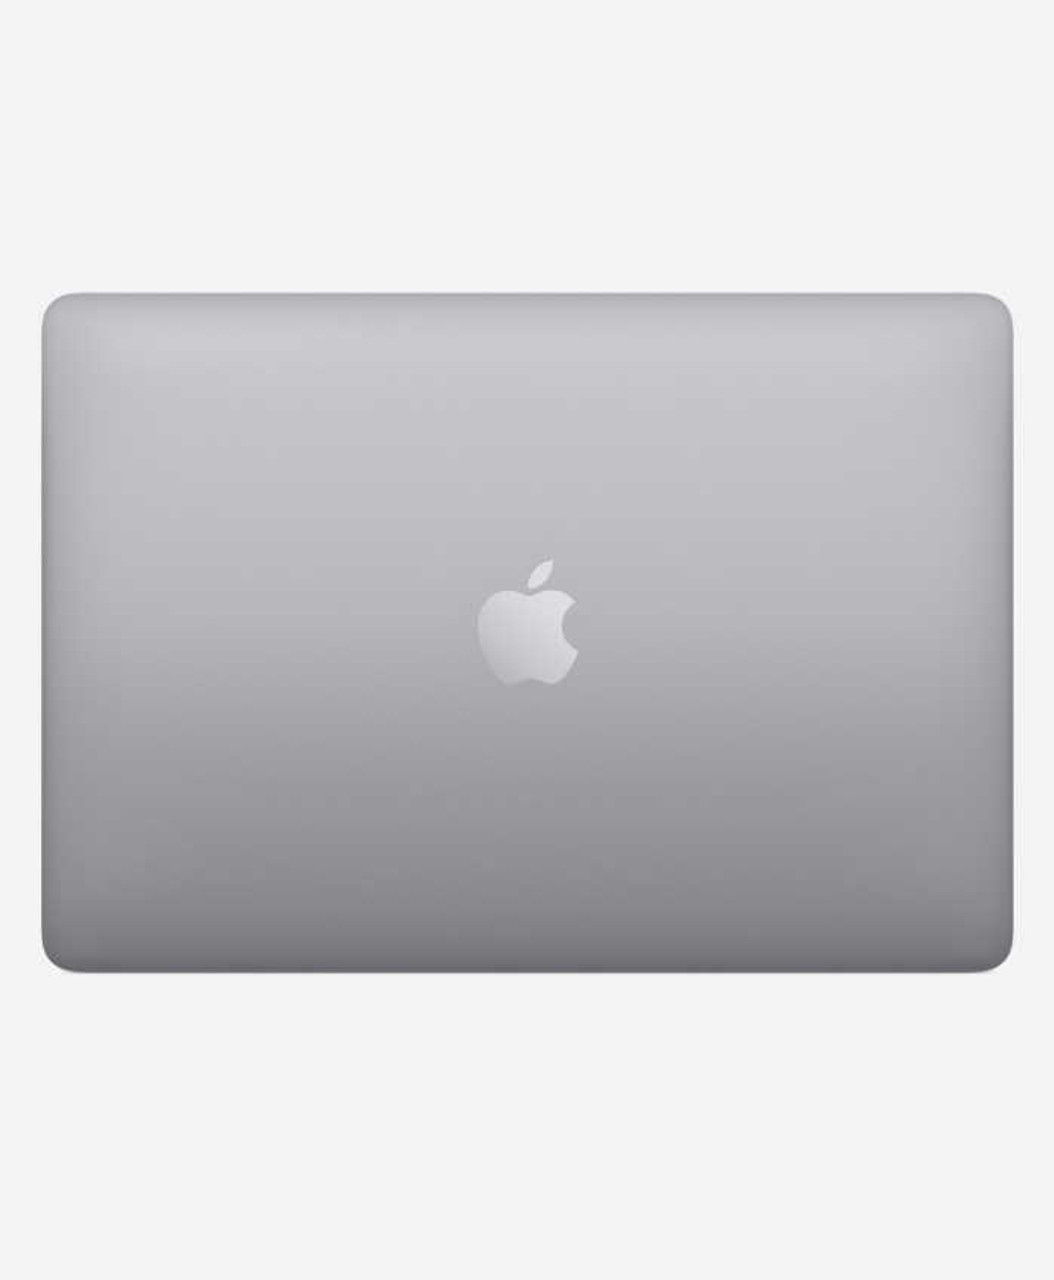 Macbook Pro 13.3-inch (Retina, Space Gray, Touch Bar) 2.3Ghz Quad Core i7  (2020). - Apple MWP42LL/A-BTO